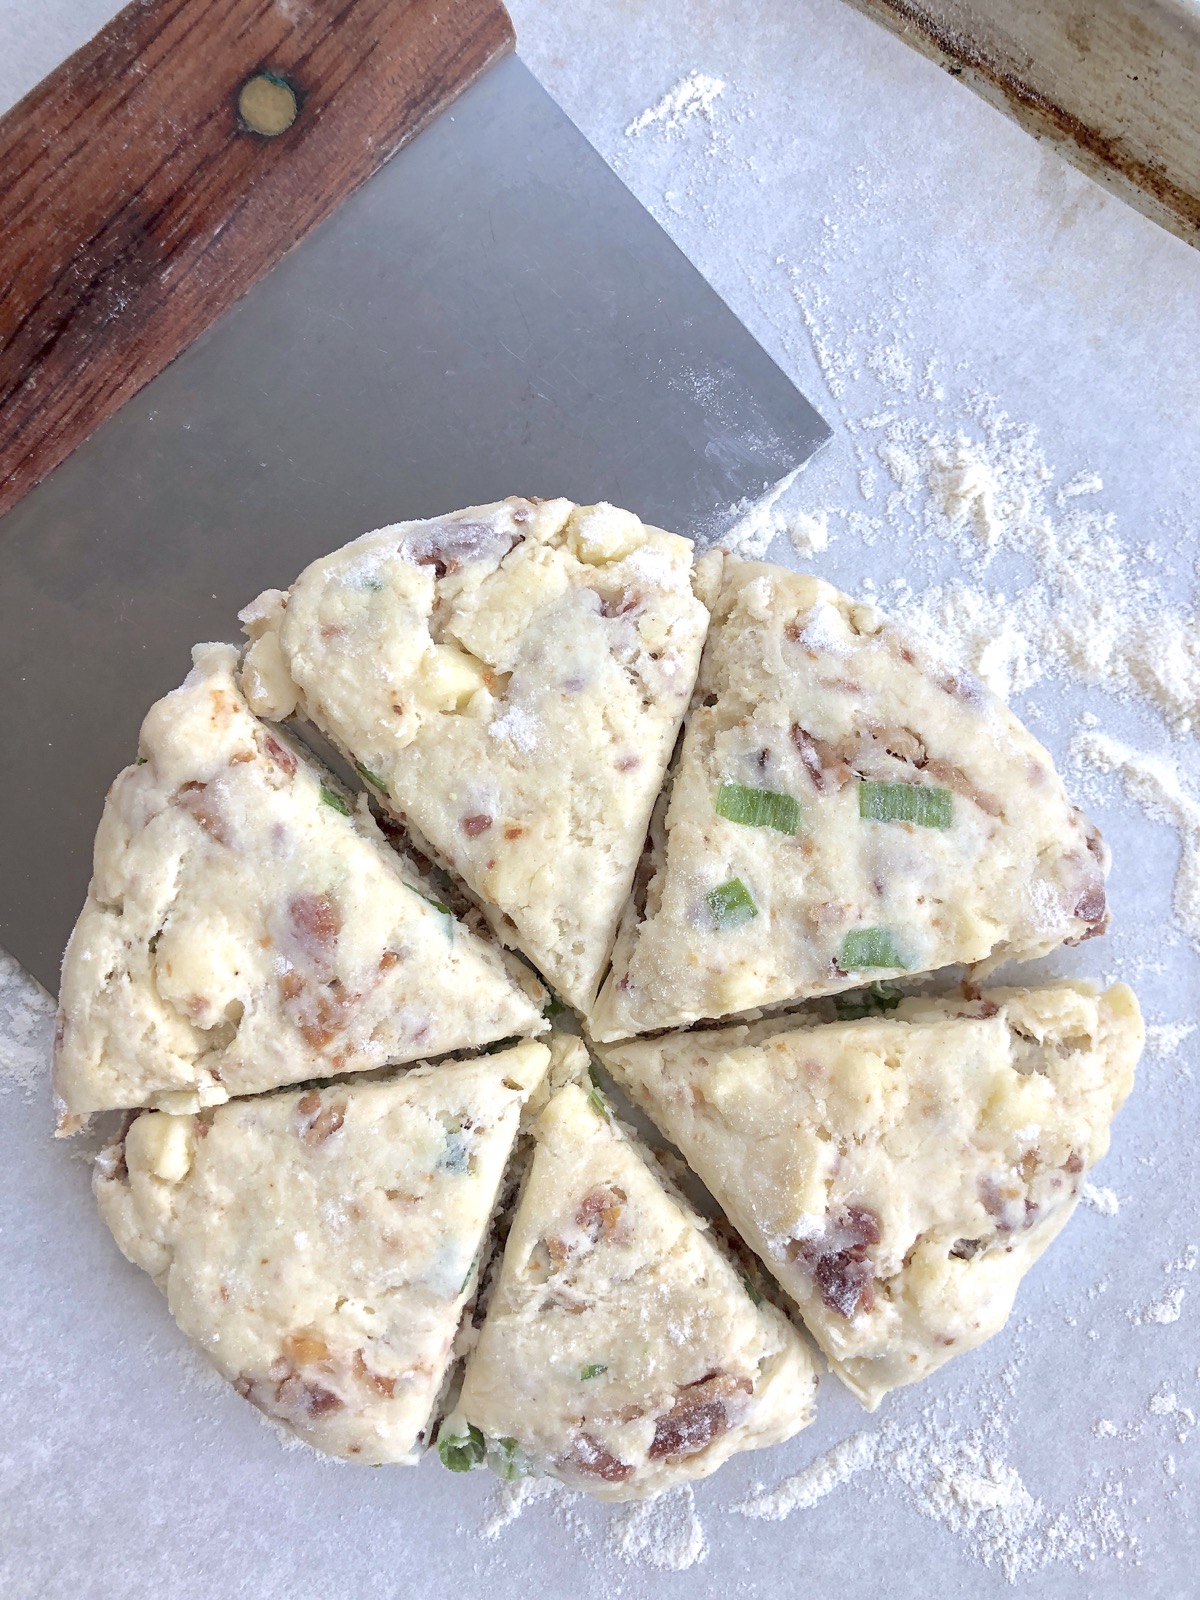 Scone dough patted into a disk and cut into six wedges using a bench knife.